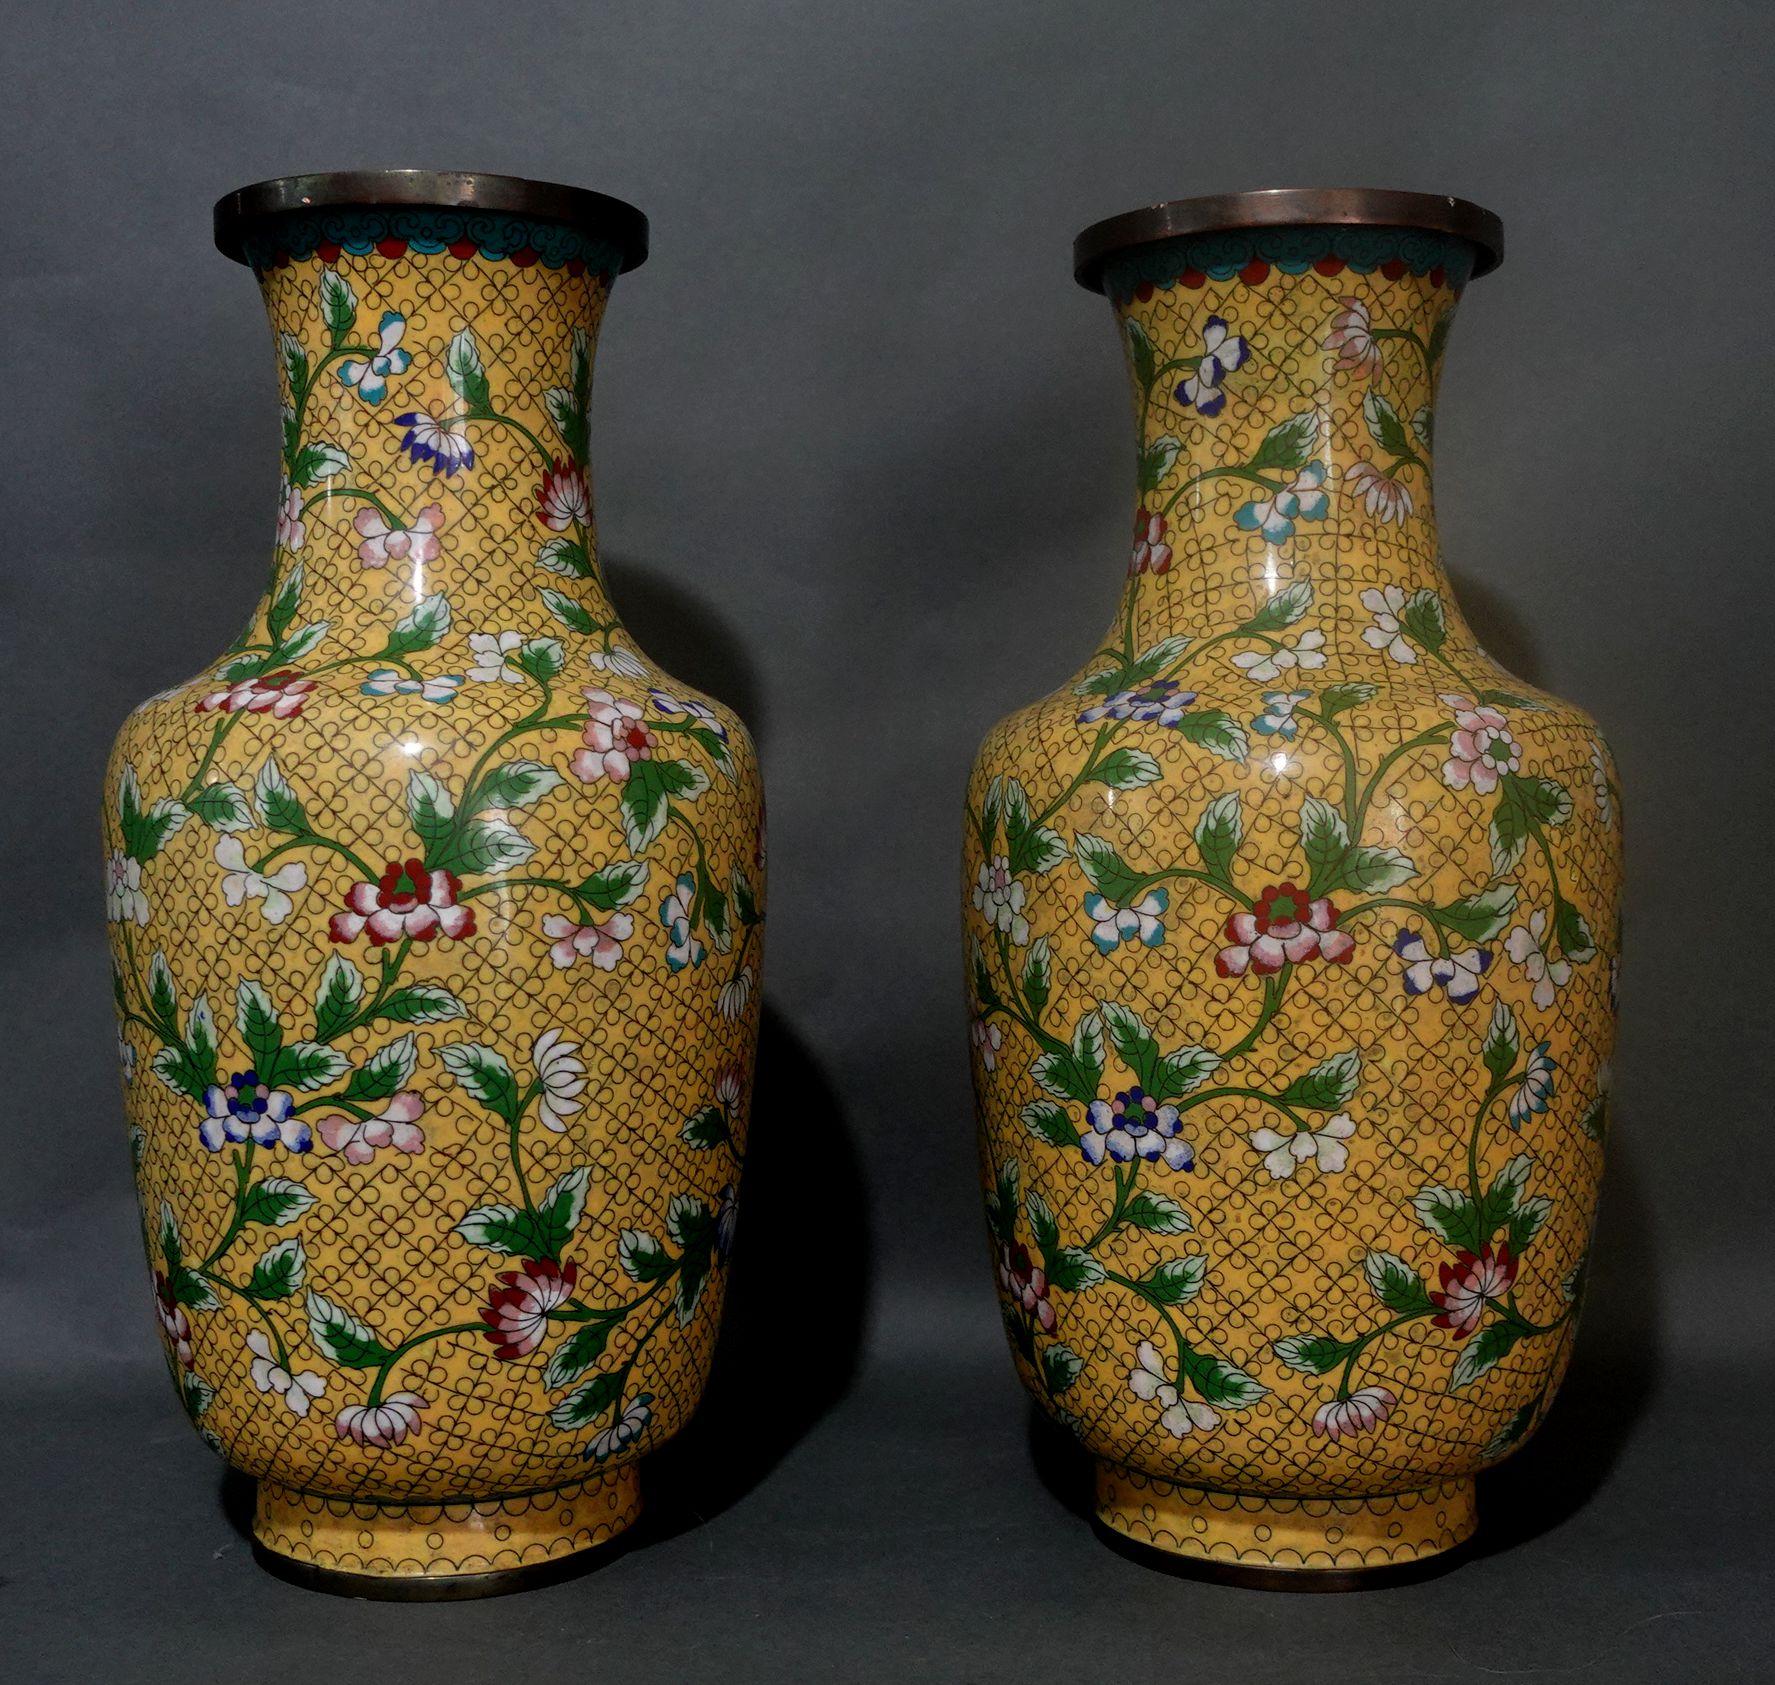 Quality work, large pair of Chinese bronze cloisonné enameled vases depicting the scene of florals on a yellow ground with vivid colors of green, red, blue, and white.
The items are in good condition, with a small enamel lost in a very small area,